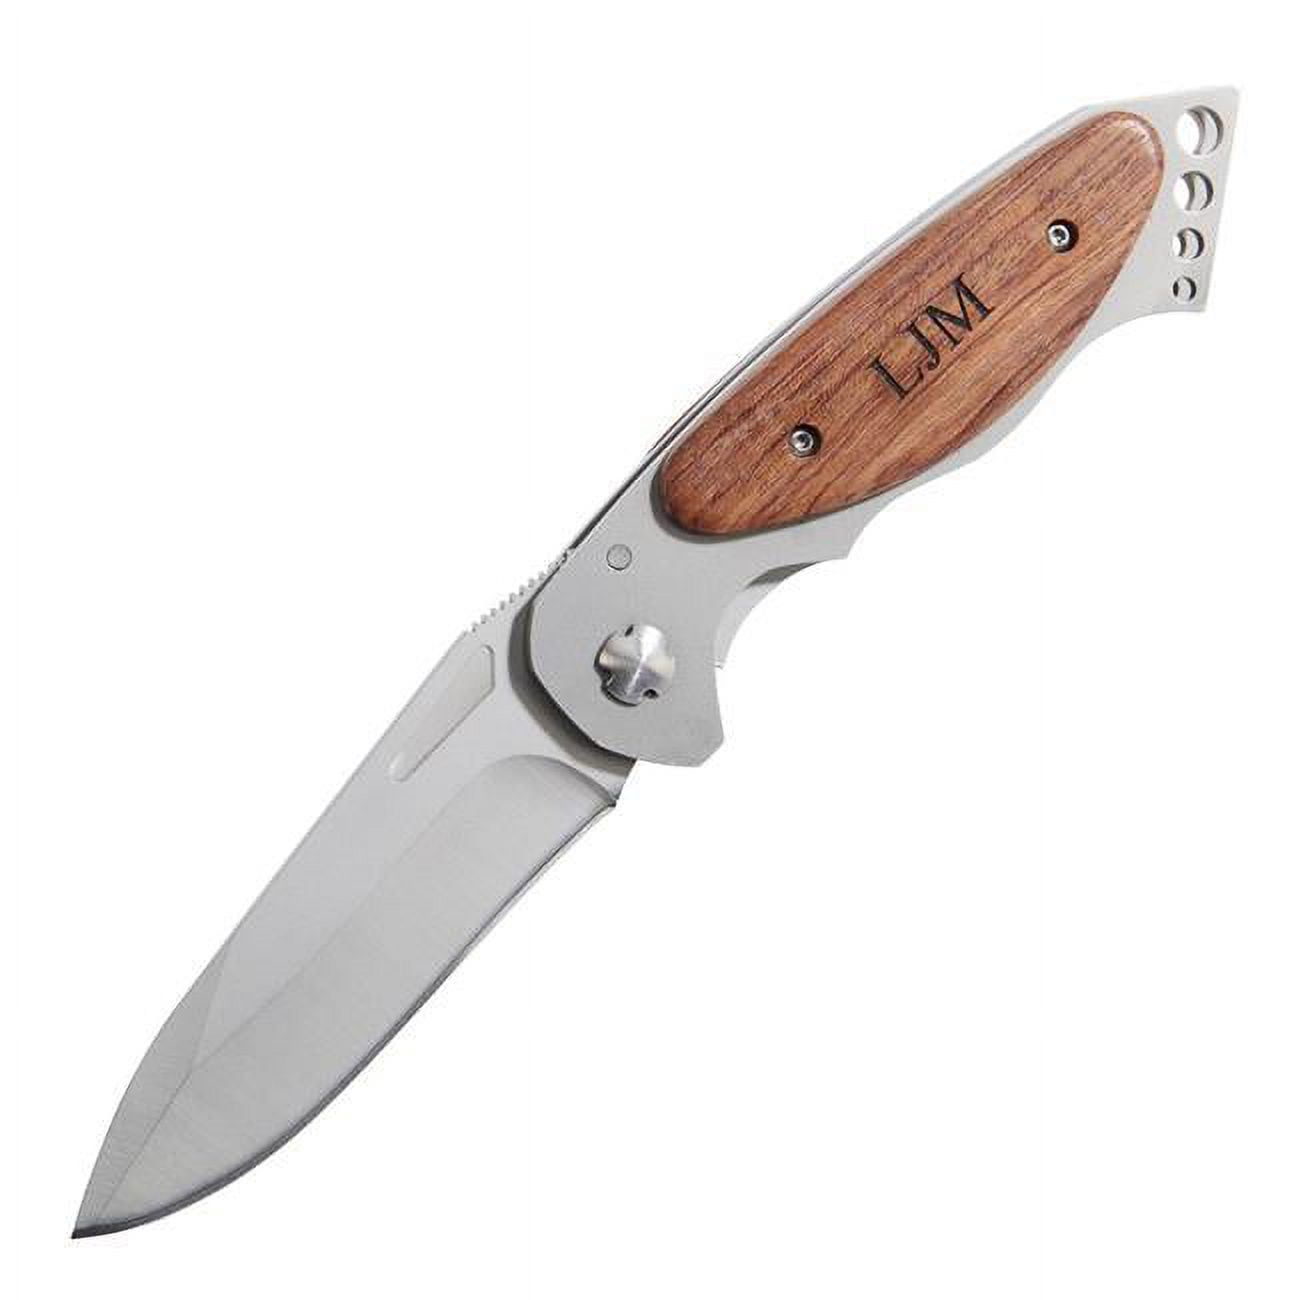 002412 4.63 In. Stainless Steel Locking Pocket Knife With Wood Handle